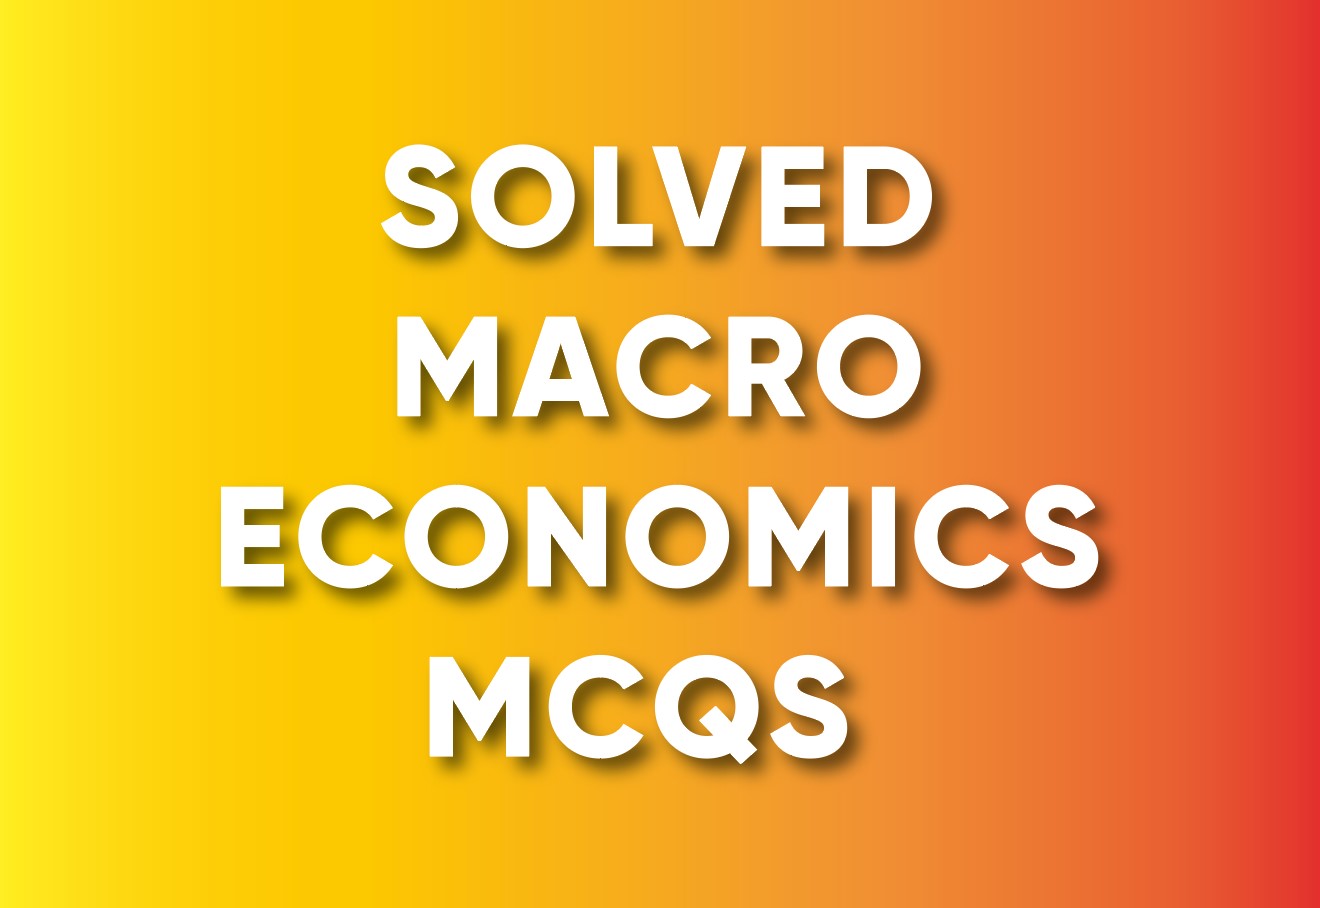 Solved Macroeconomics MCQs PDF With Answers Available